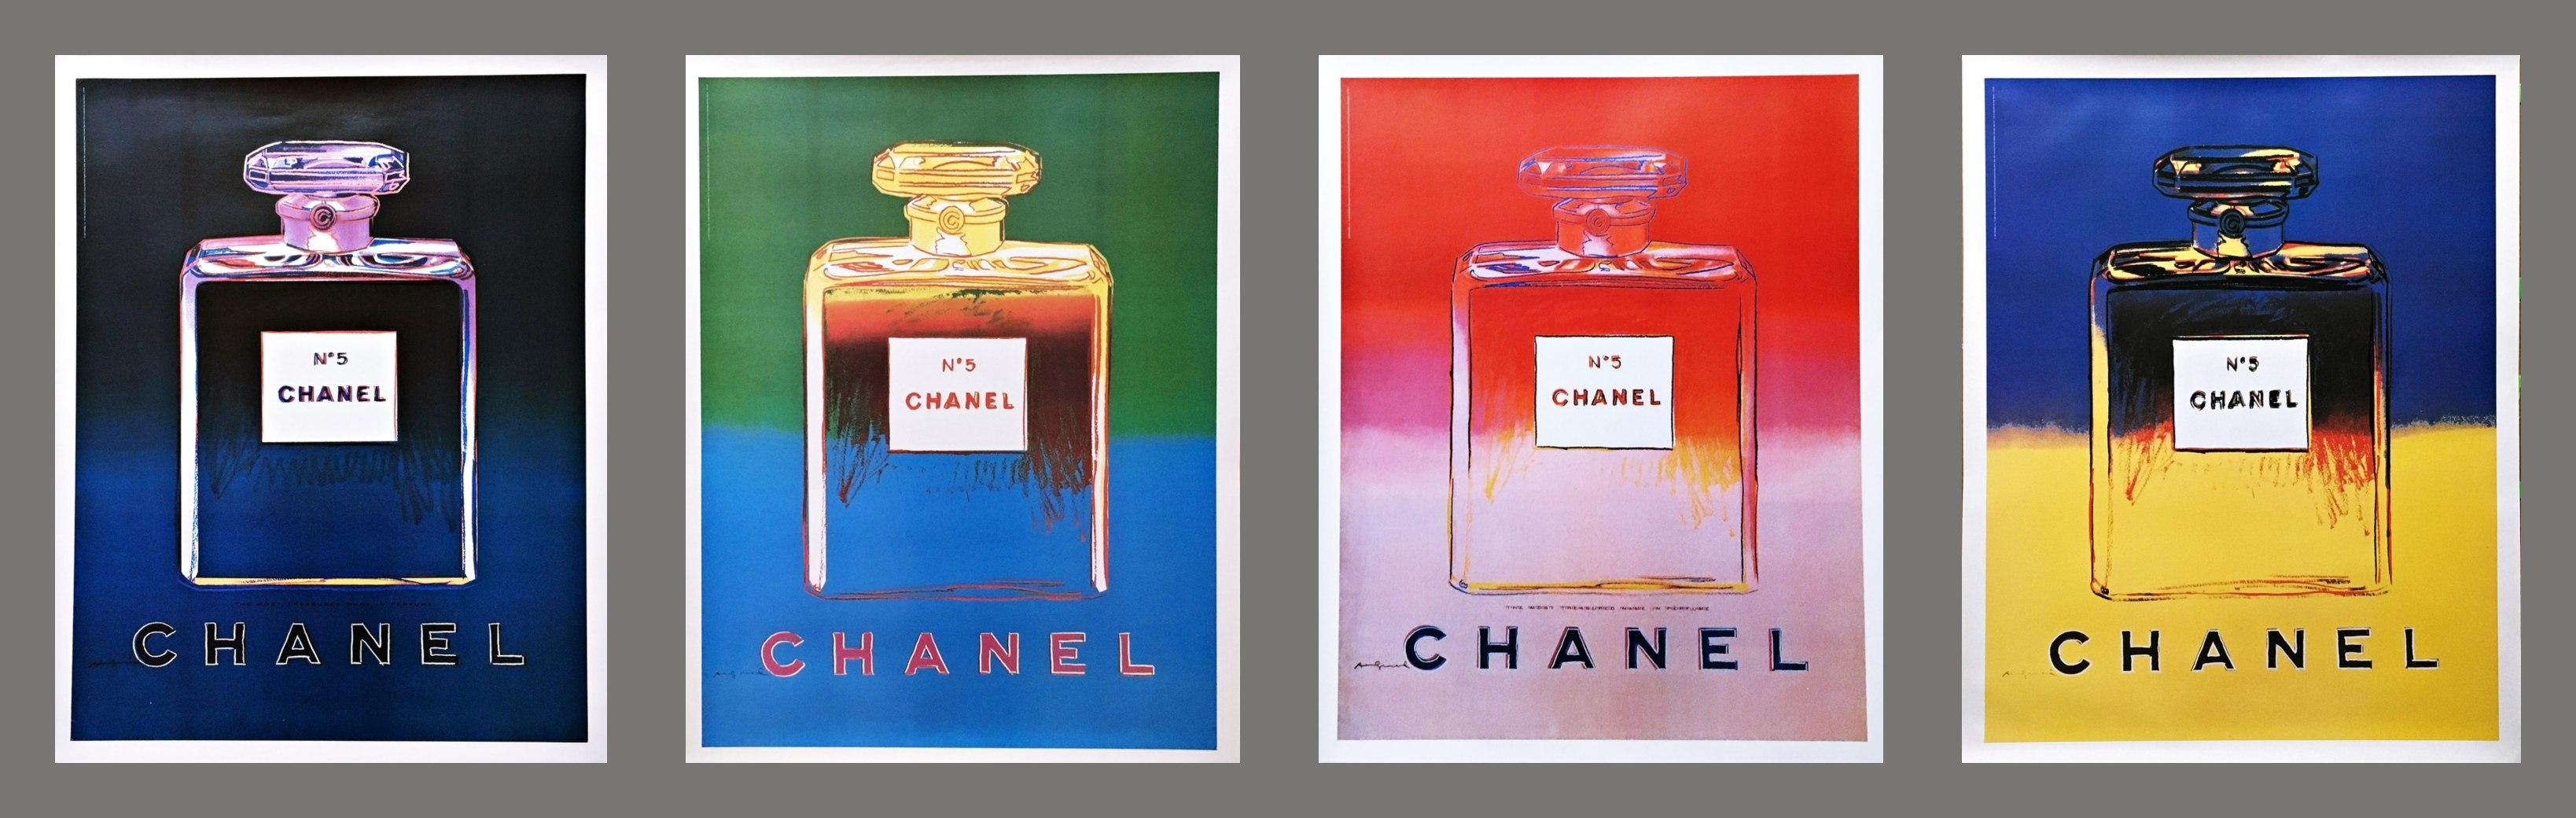 Andy Warhol - Chanel No. 5 (Suite of Four Individual (Separate) Prints on  Linen Canvas) at 1stDibs | andy warhol chanel no 5, andy warhol chanel  print, chanel warhol